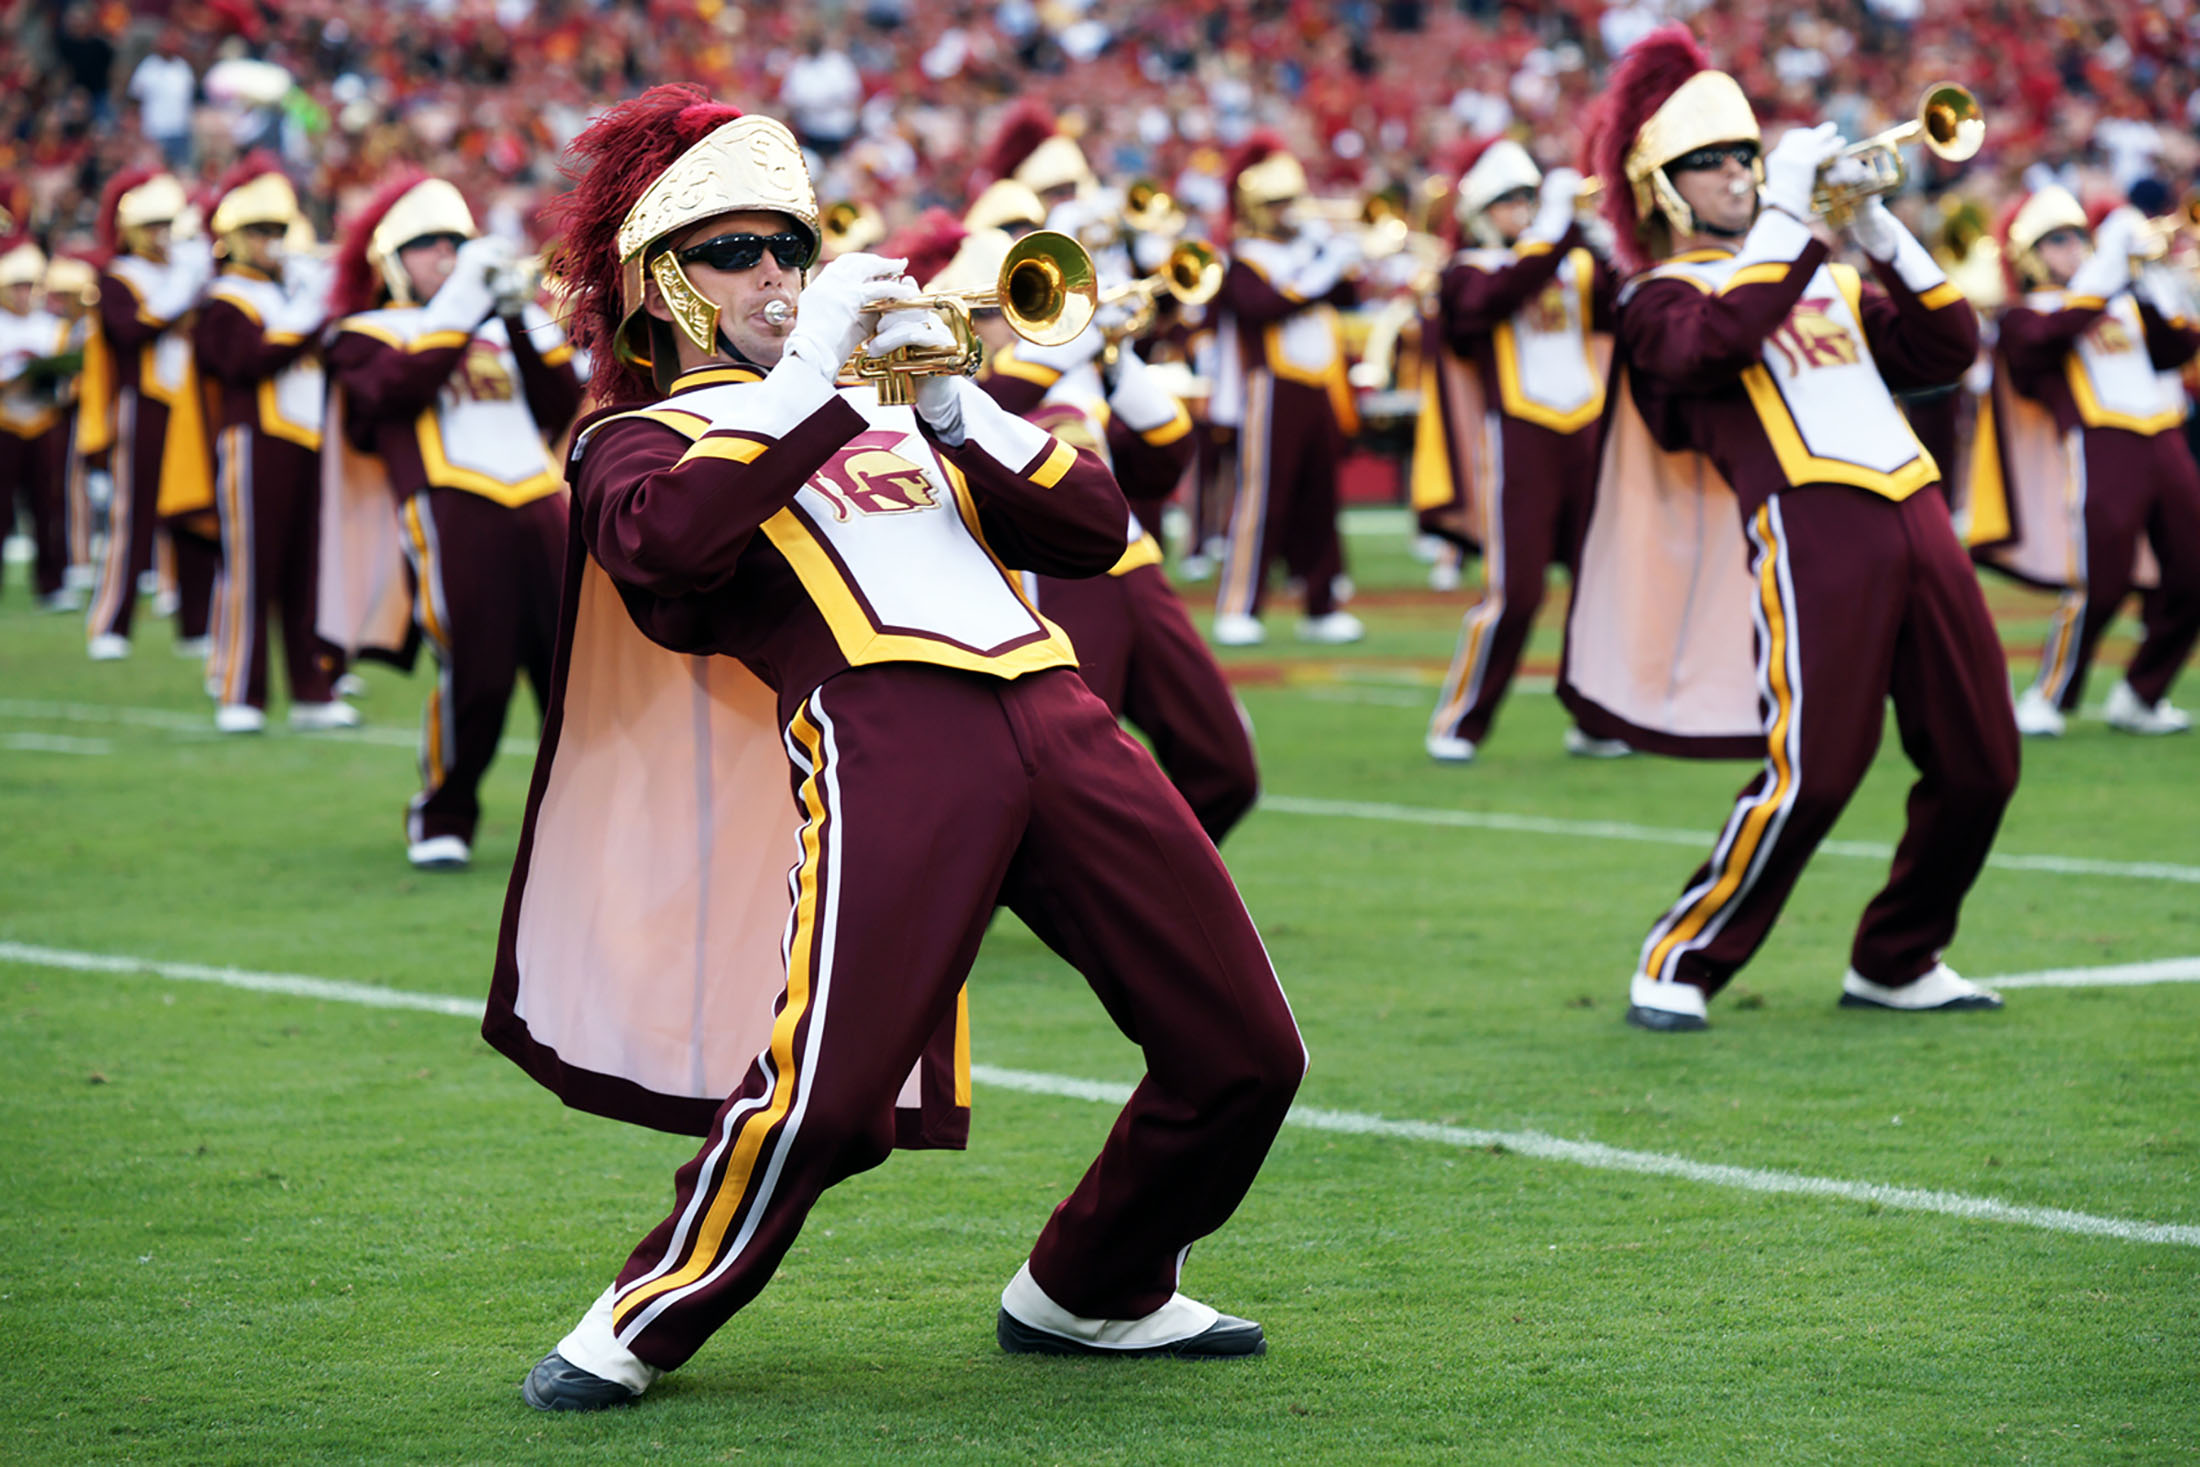 USC band playing at a football game.